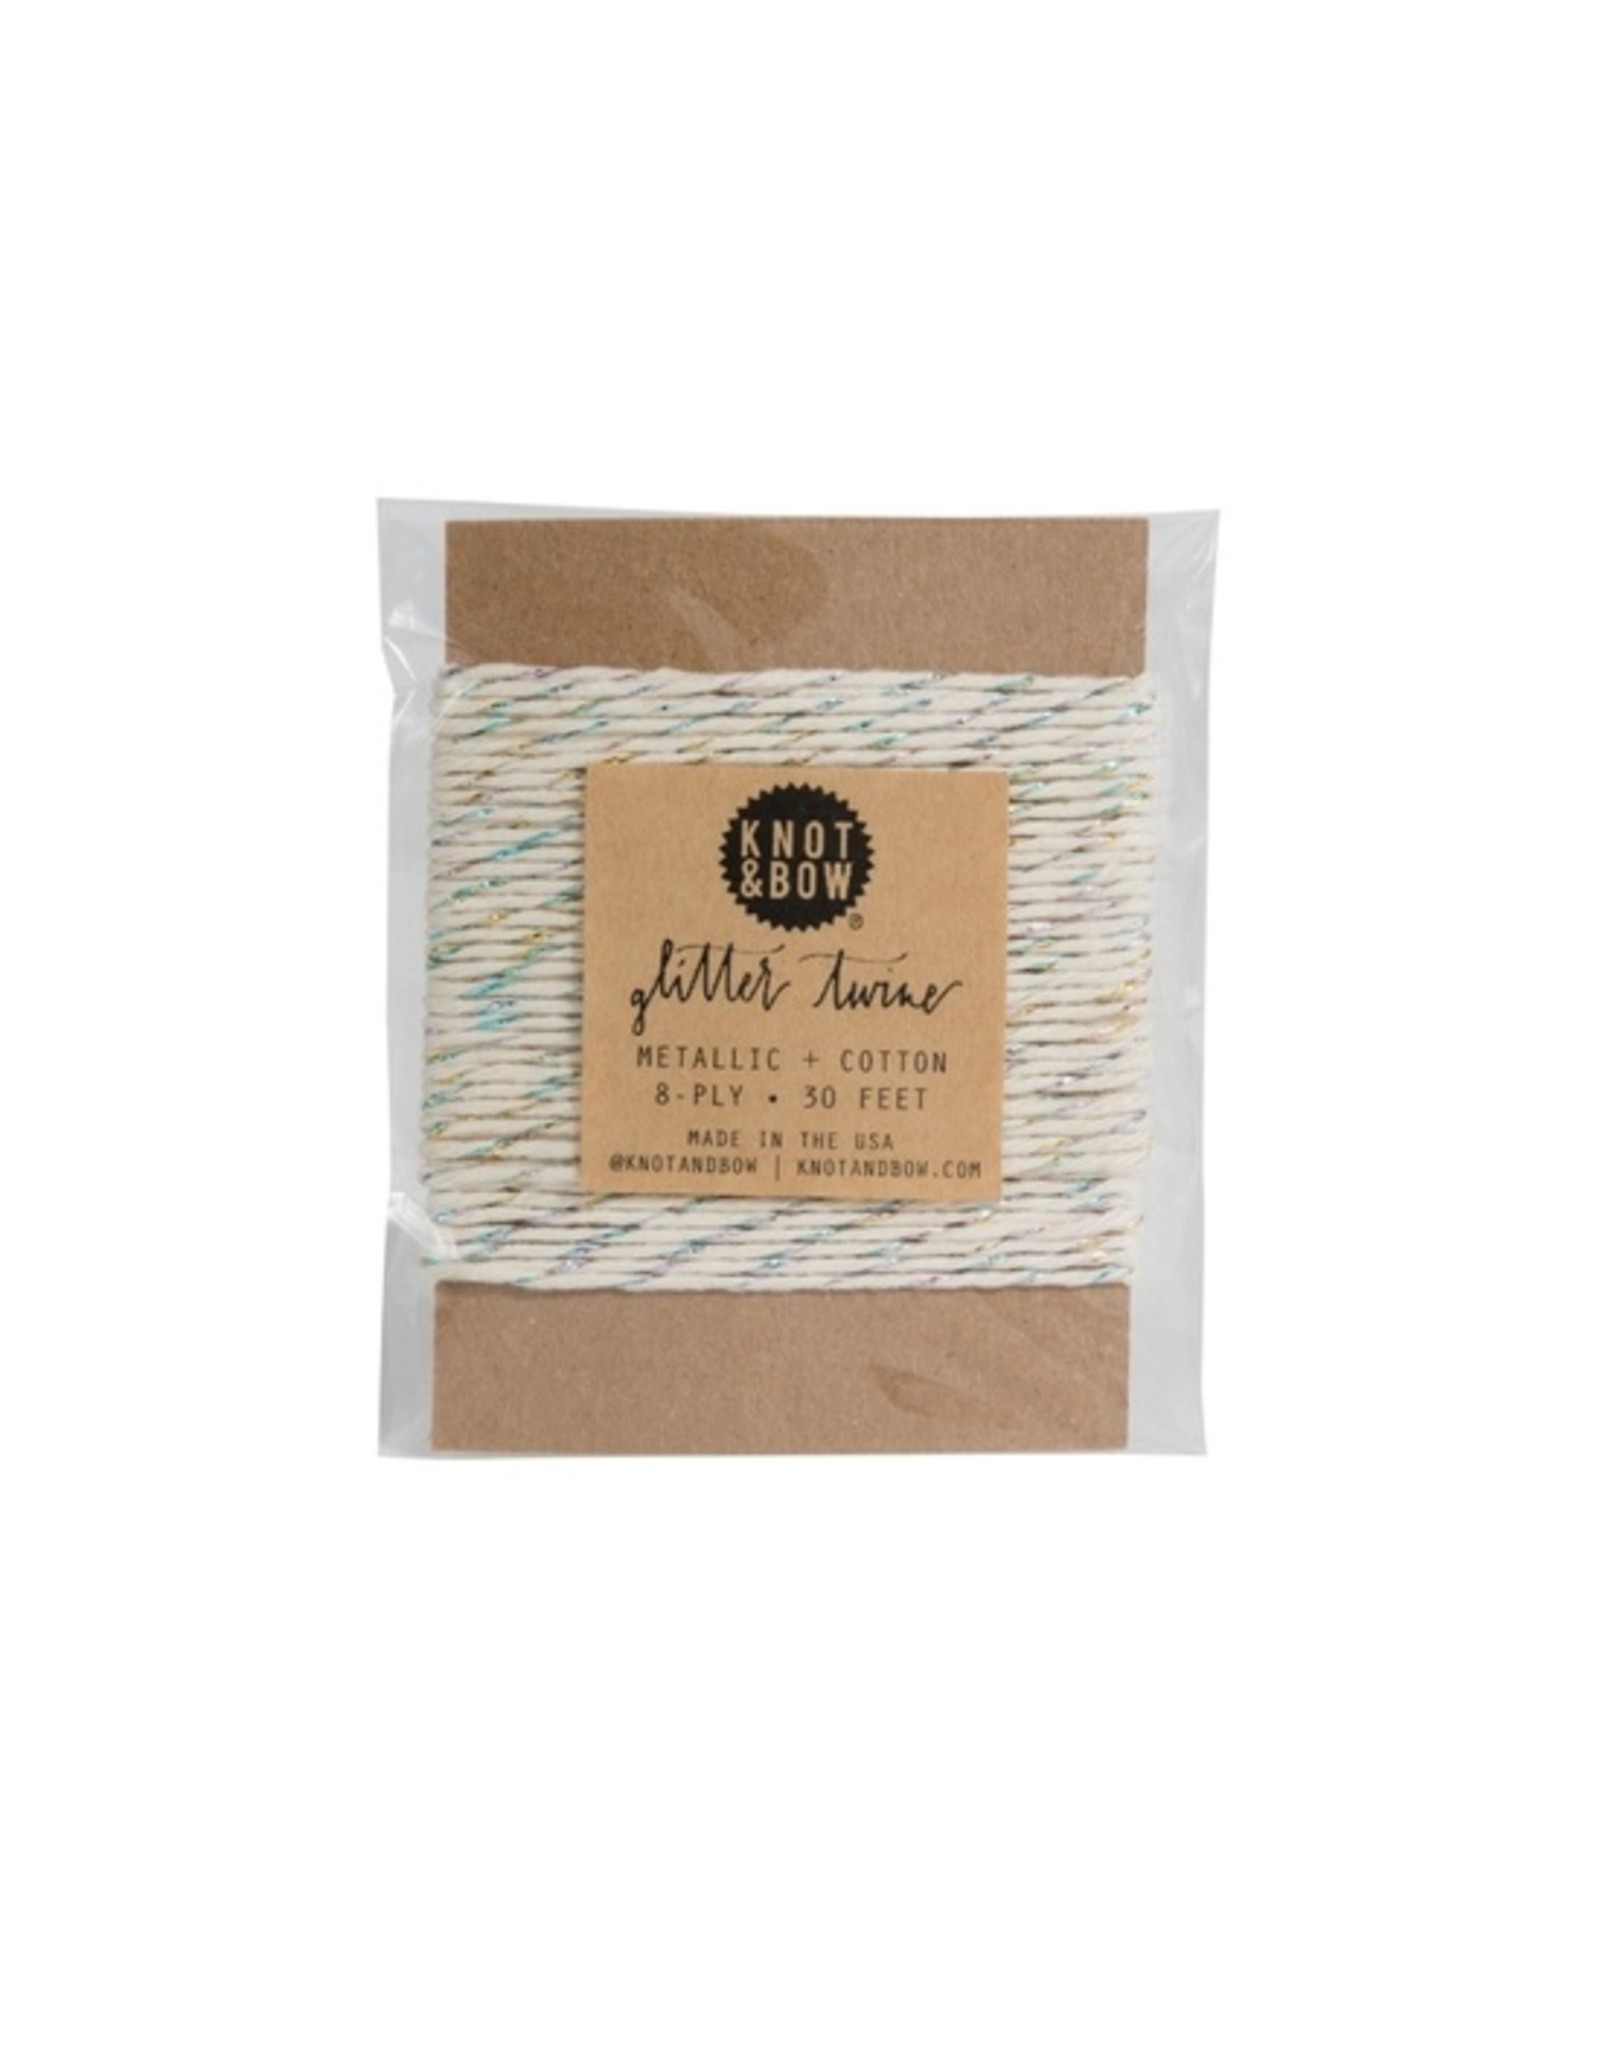 Knot & Bow Glitter Twine - Prism/Natural